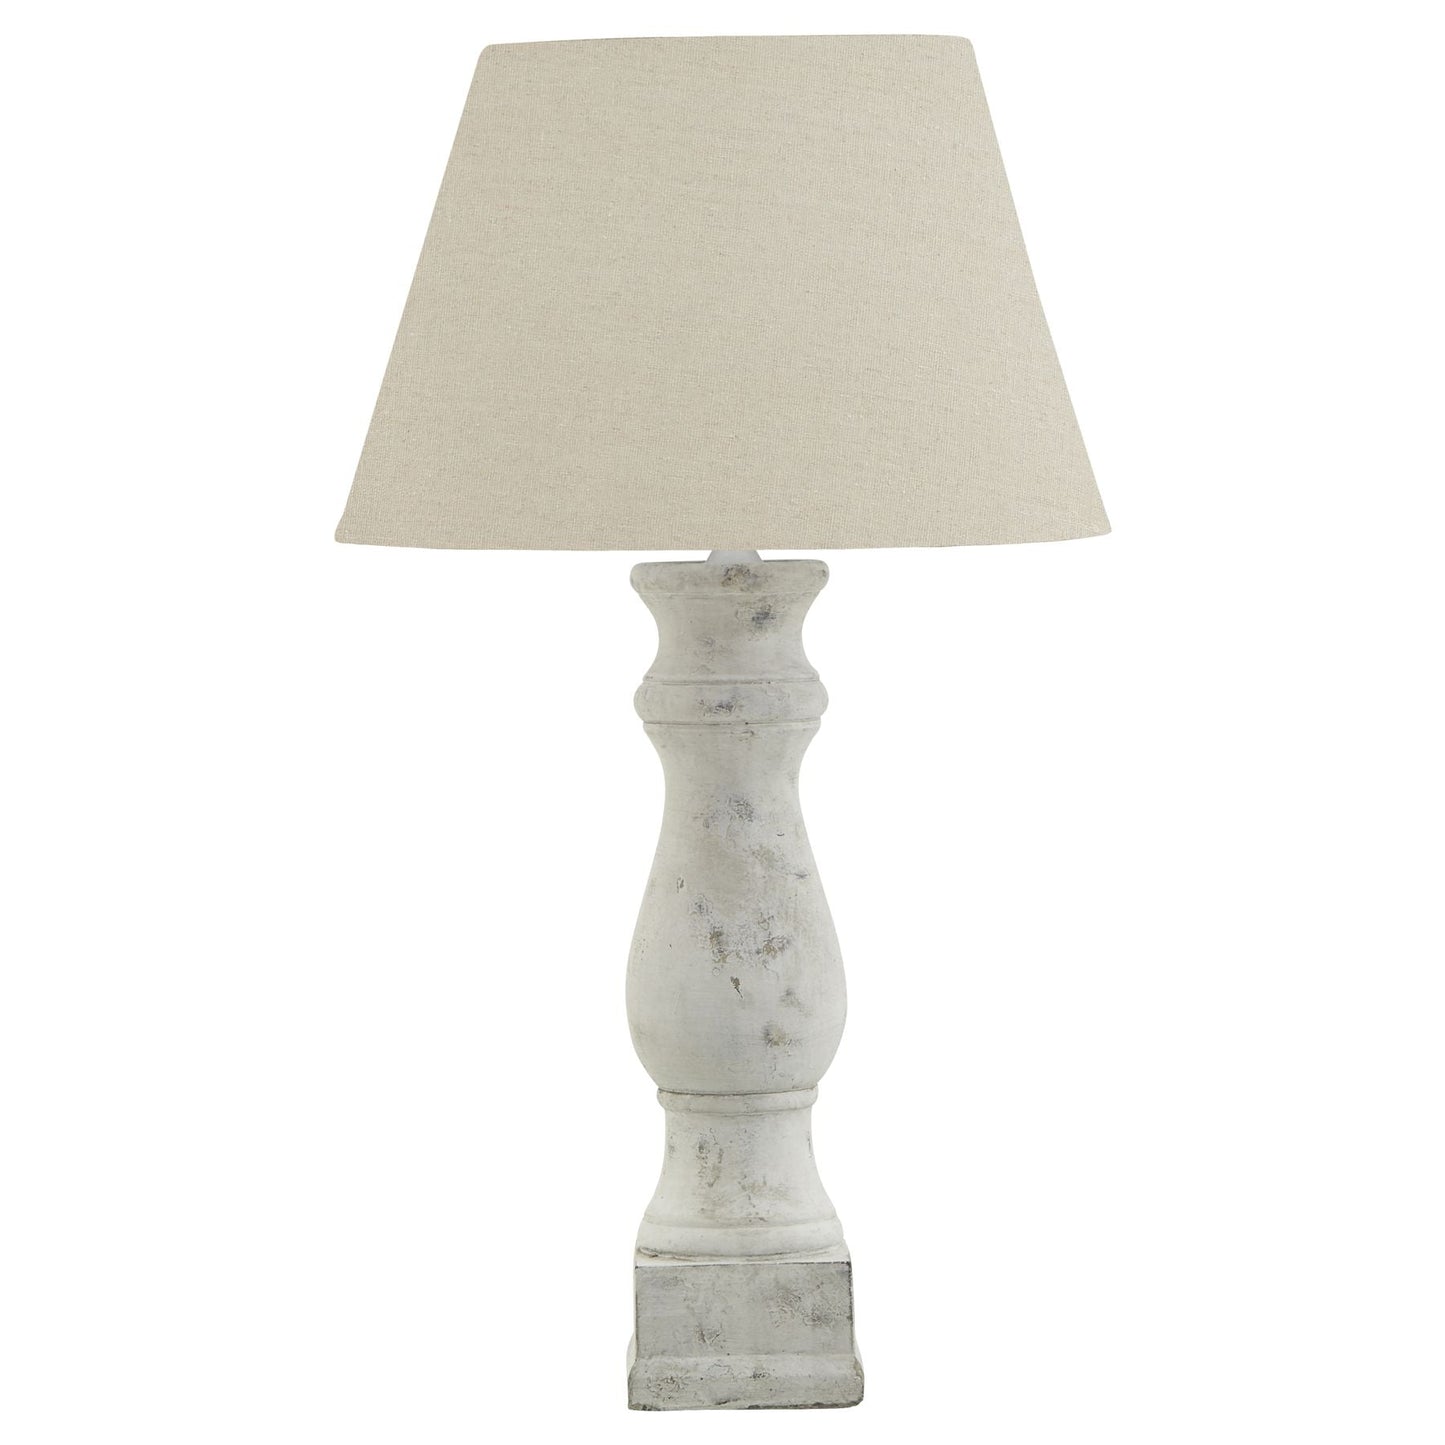 Hill Interiors Table Lamp Darcy Antique White Candlestick Table Lamp With Linen Shade